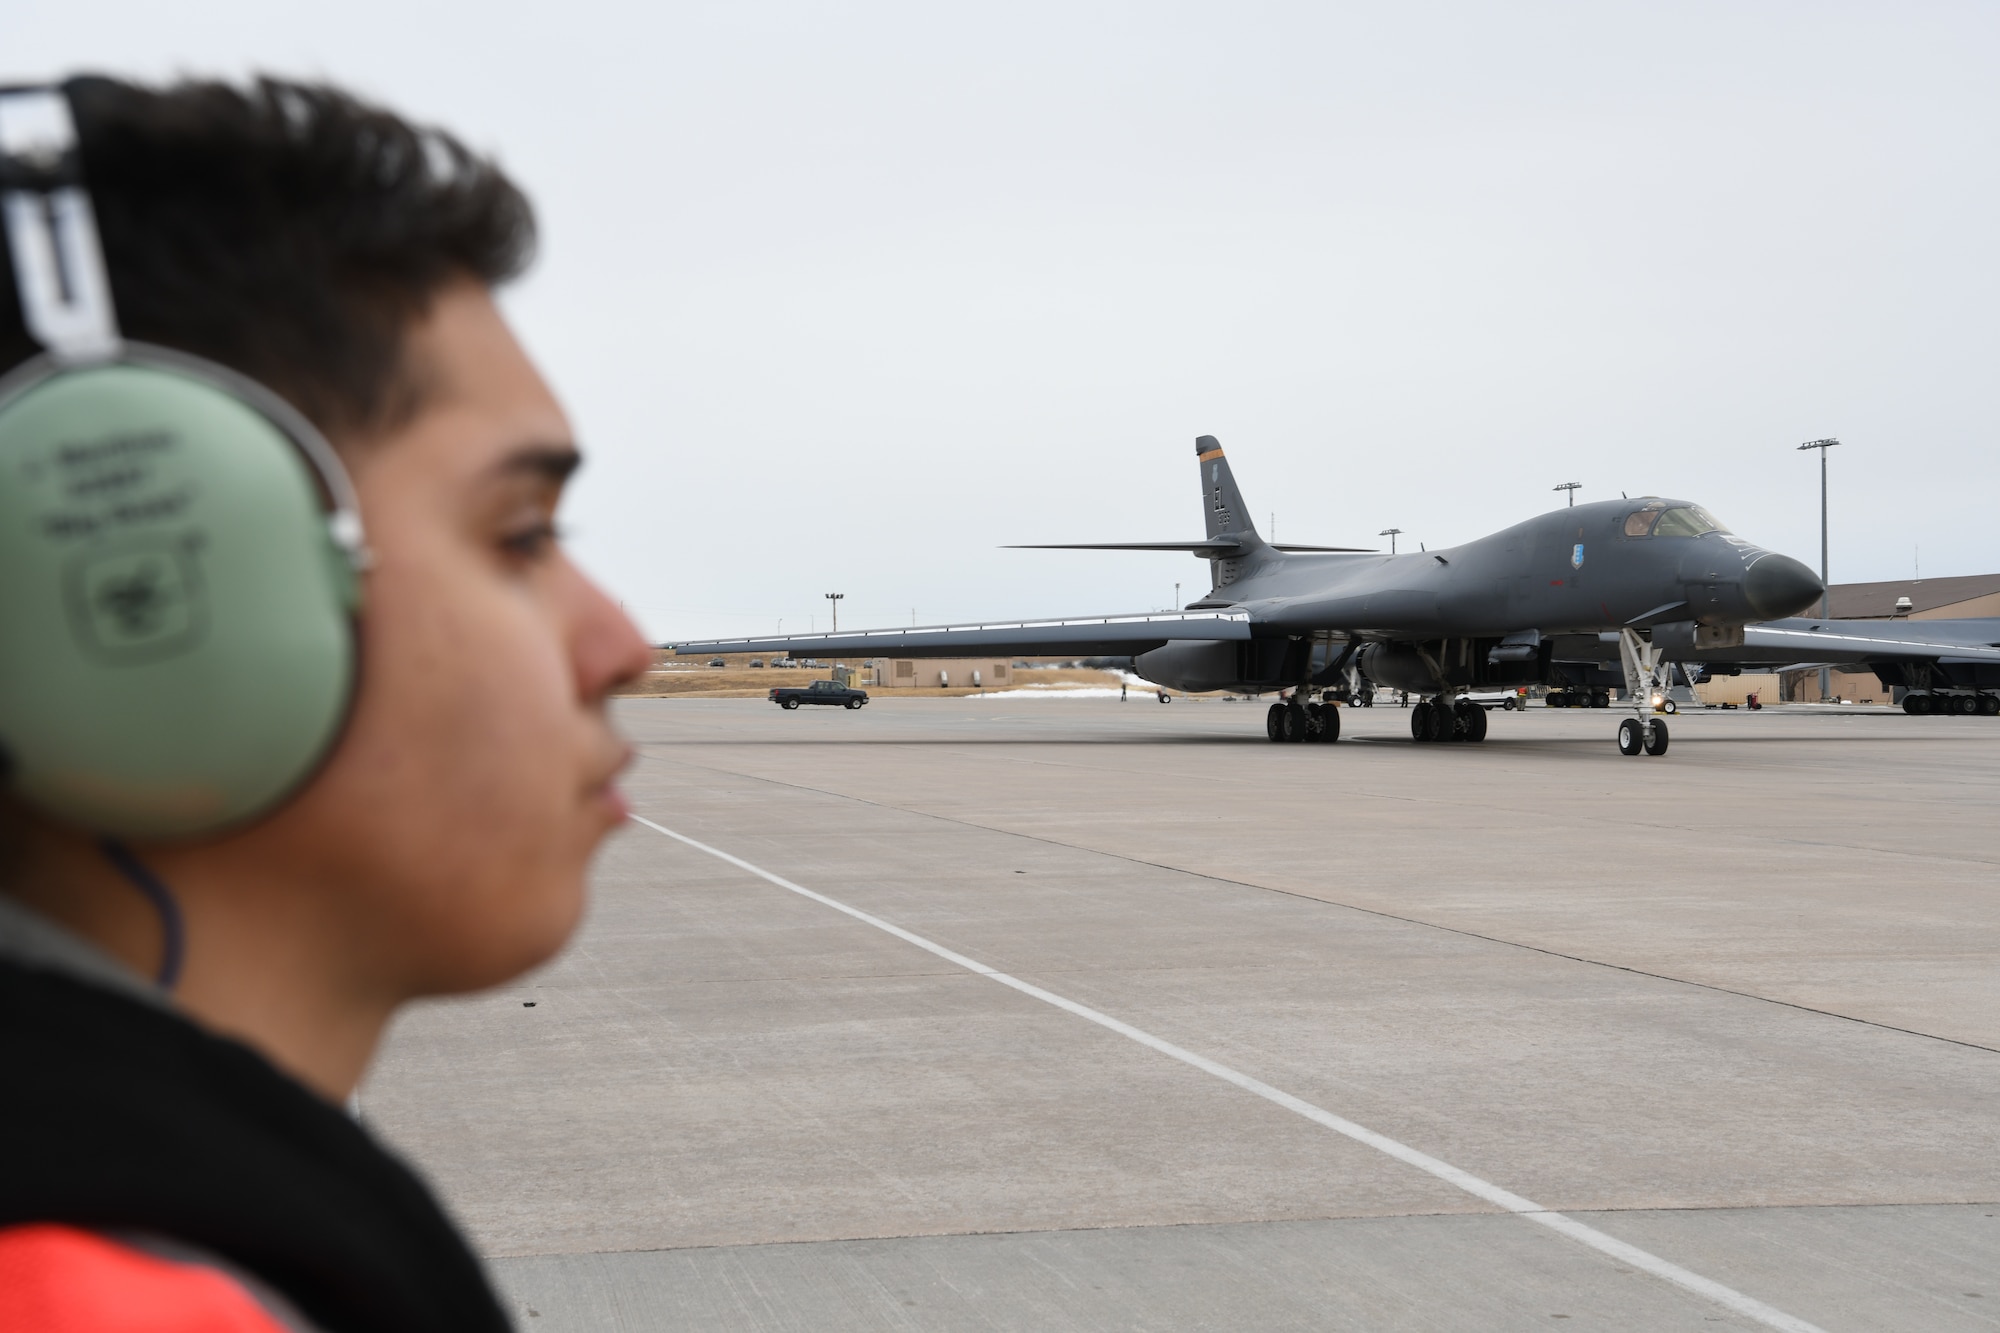 Airman Jacob Martinez, a 37th Bomb Squadron crew chief, waits as a B-1B Lancer taxis at Ellsworth Air Force Base, S.D., Jan. 22, 2020. The mission of Red Flag is to maximize the combat readiness and survivability of participants by providing multi-domain training in a combined threat environment. (U.S. Air Force photo by Senior Airman Nicolas Z. Erwin)